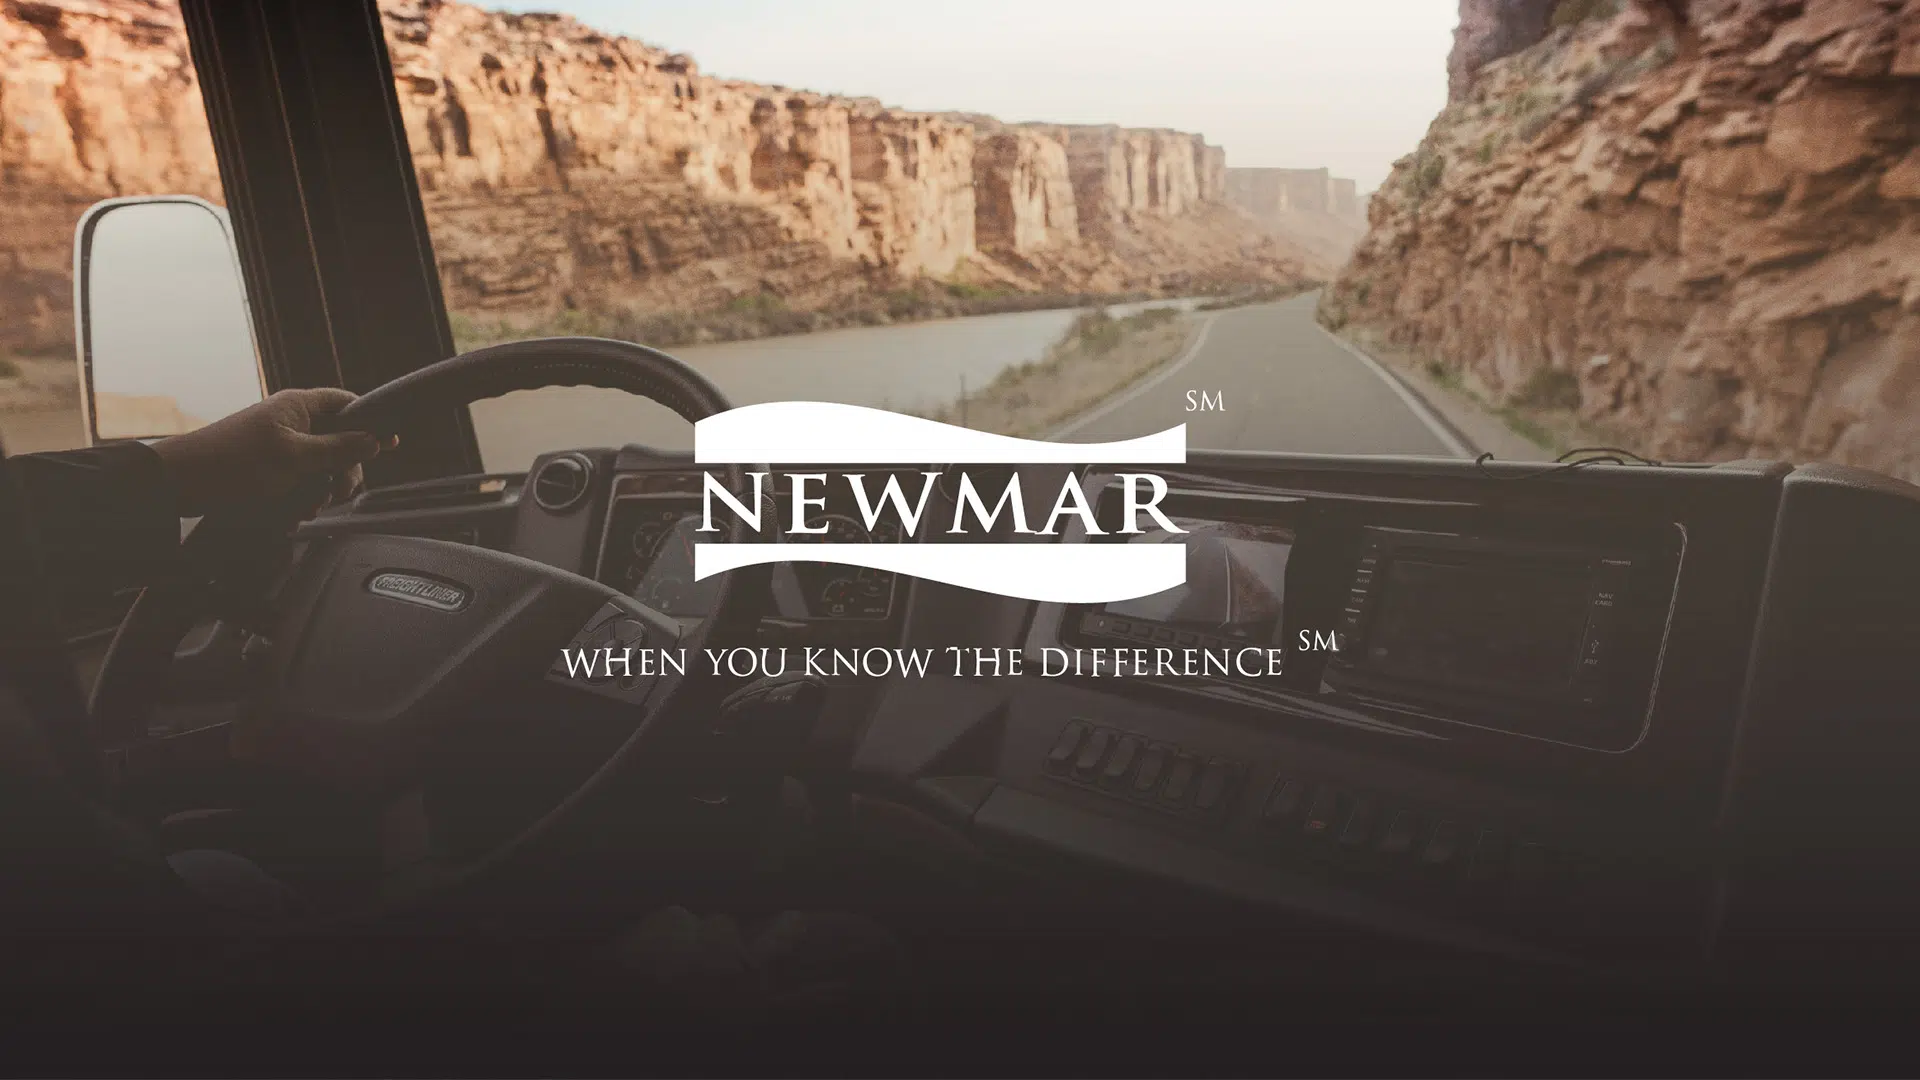 Newmar – Client Story